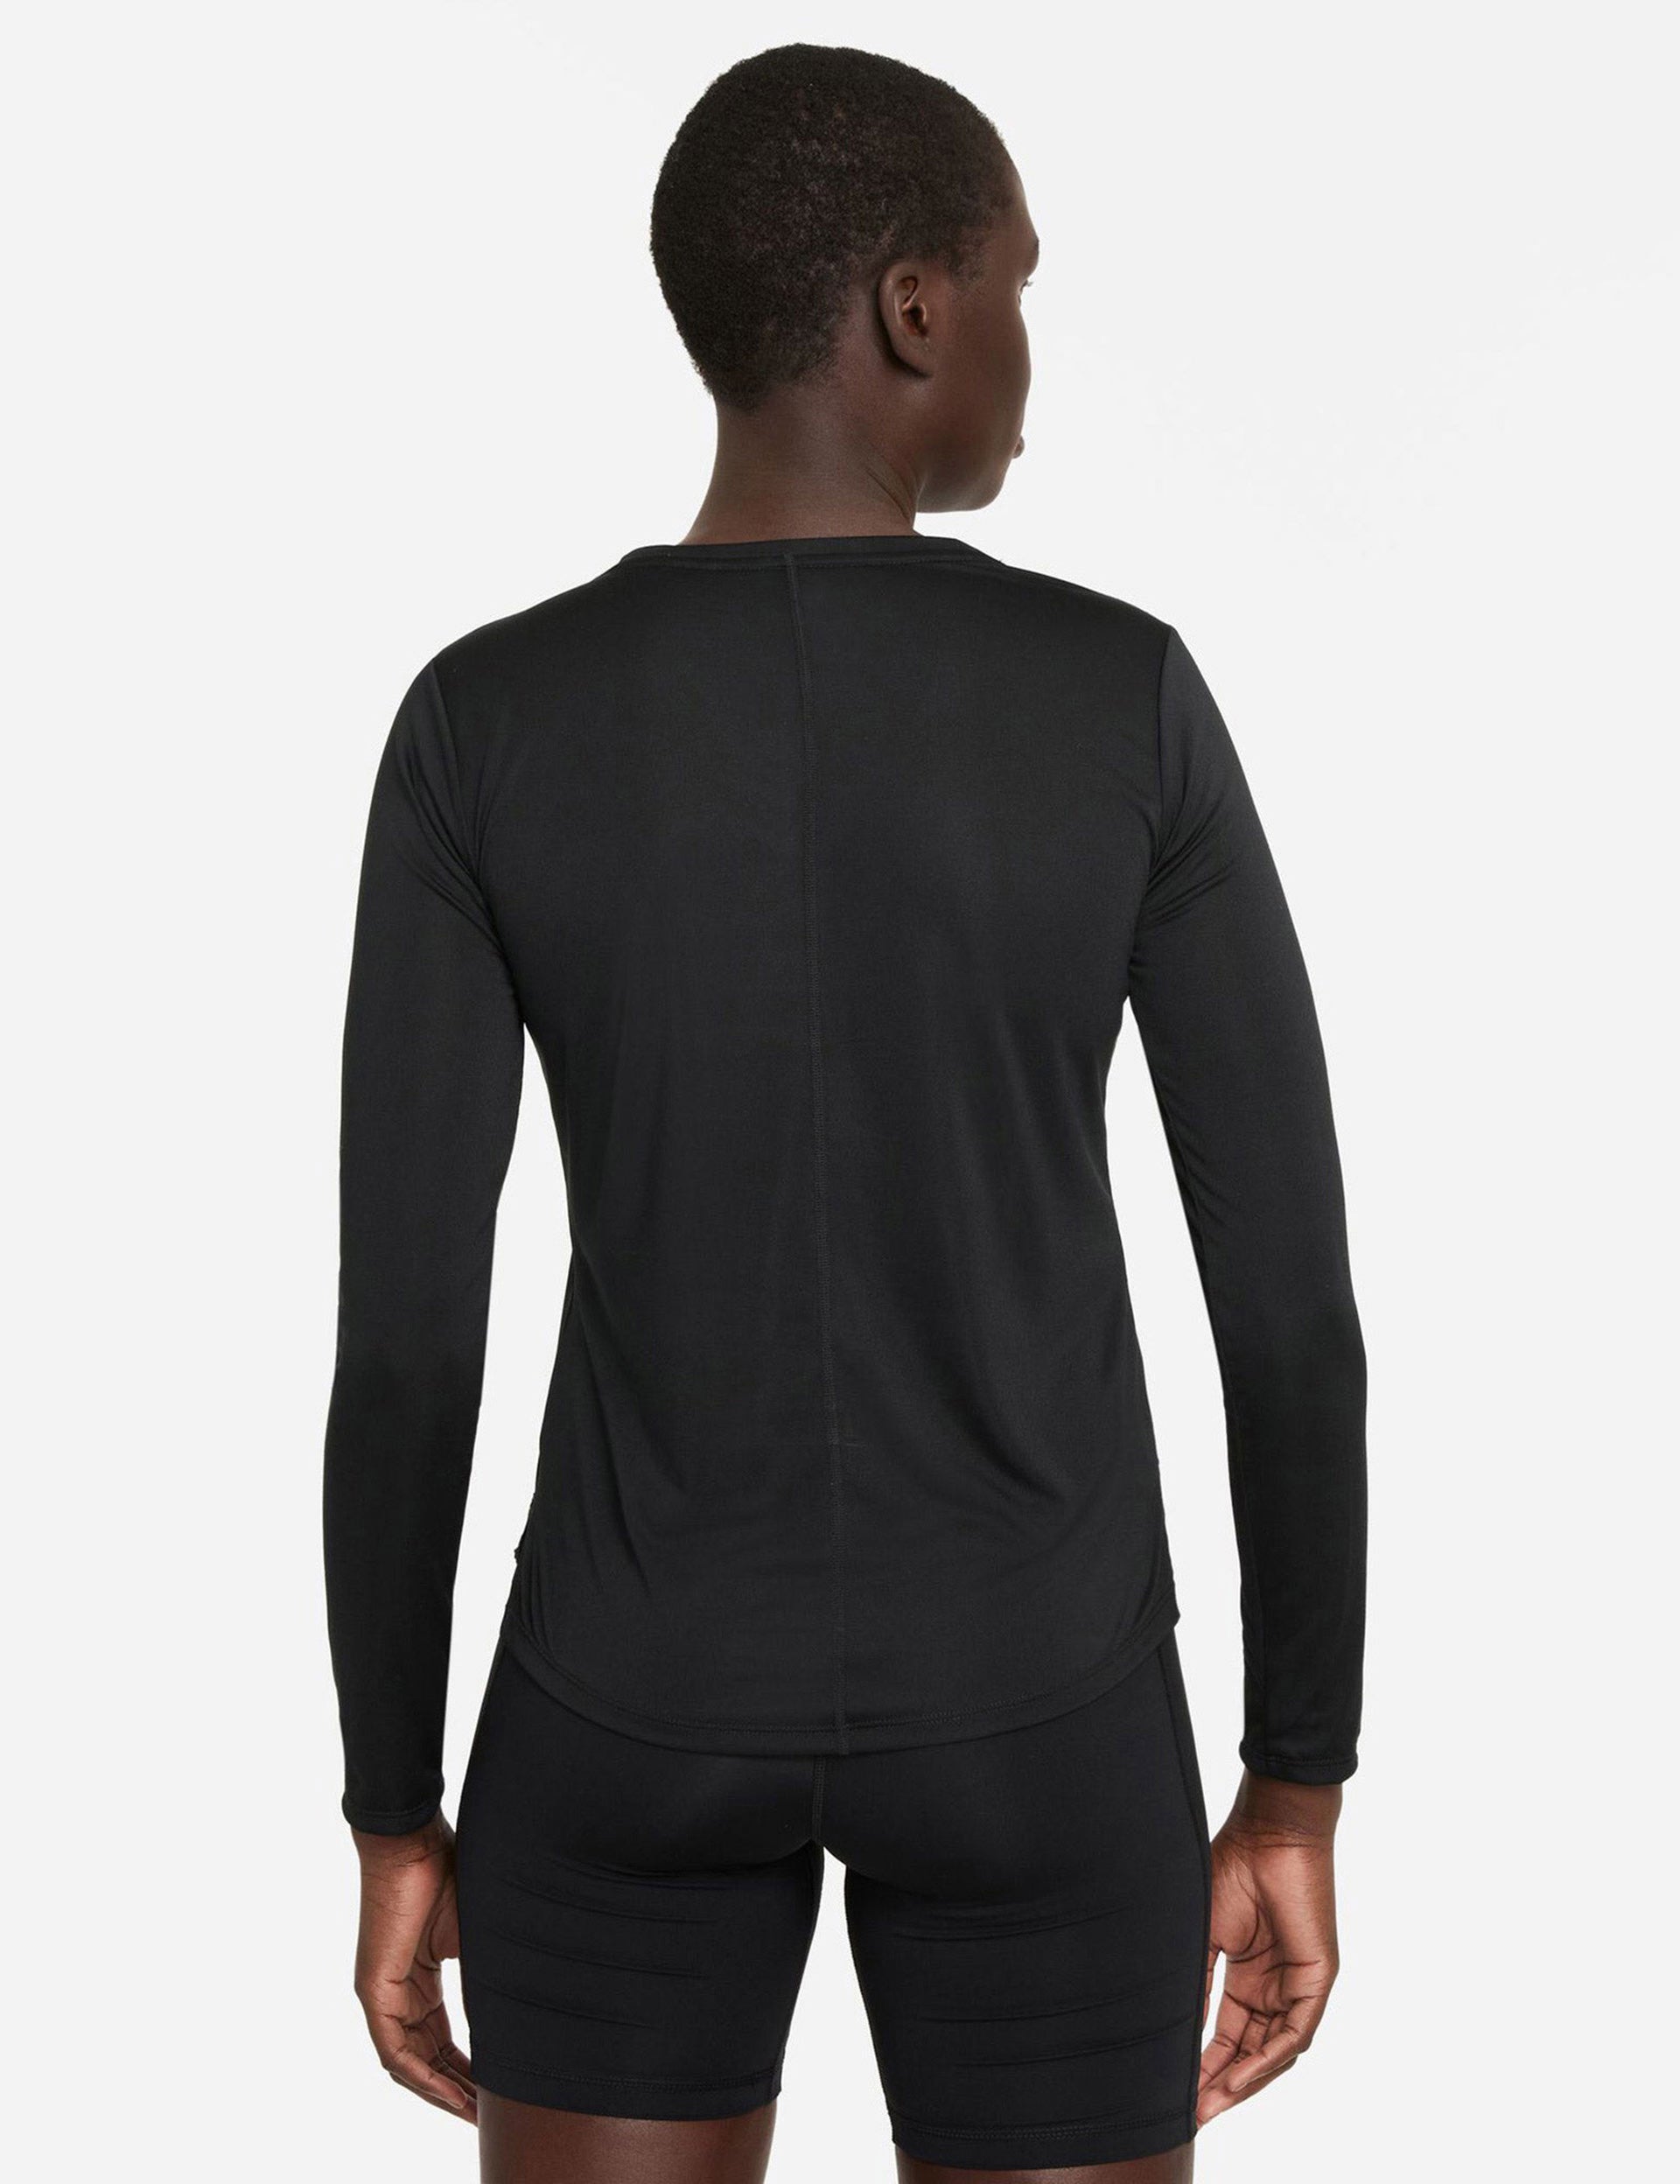 Nike Dri-FIT One Long-Sleeve Top - Black/Whiteimages2- The Sports Edit